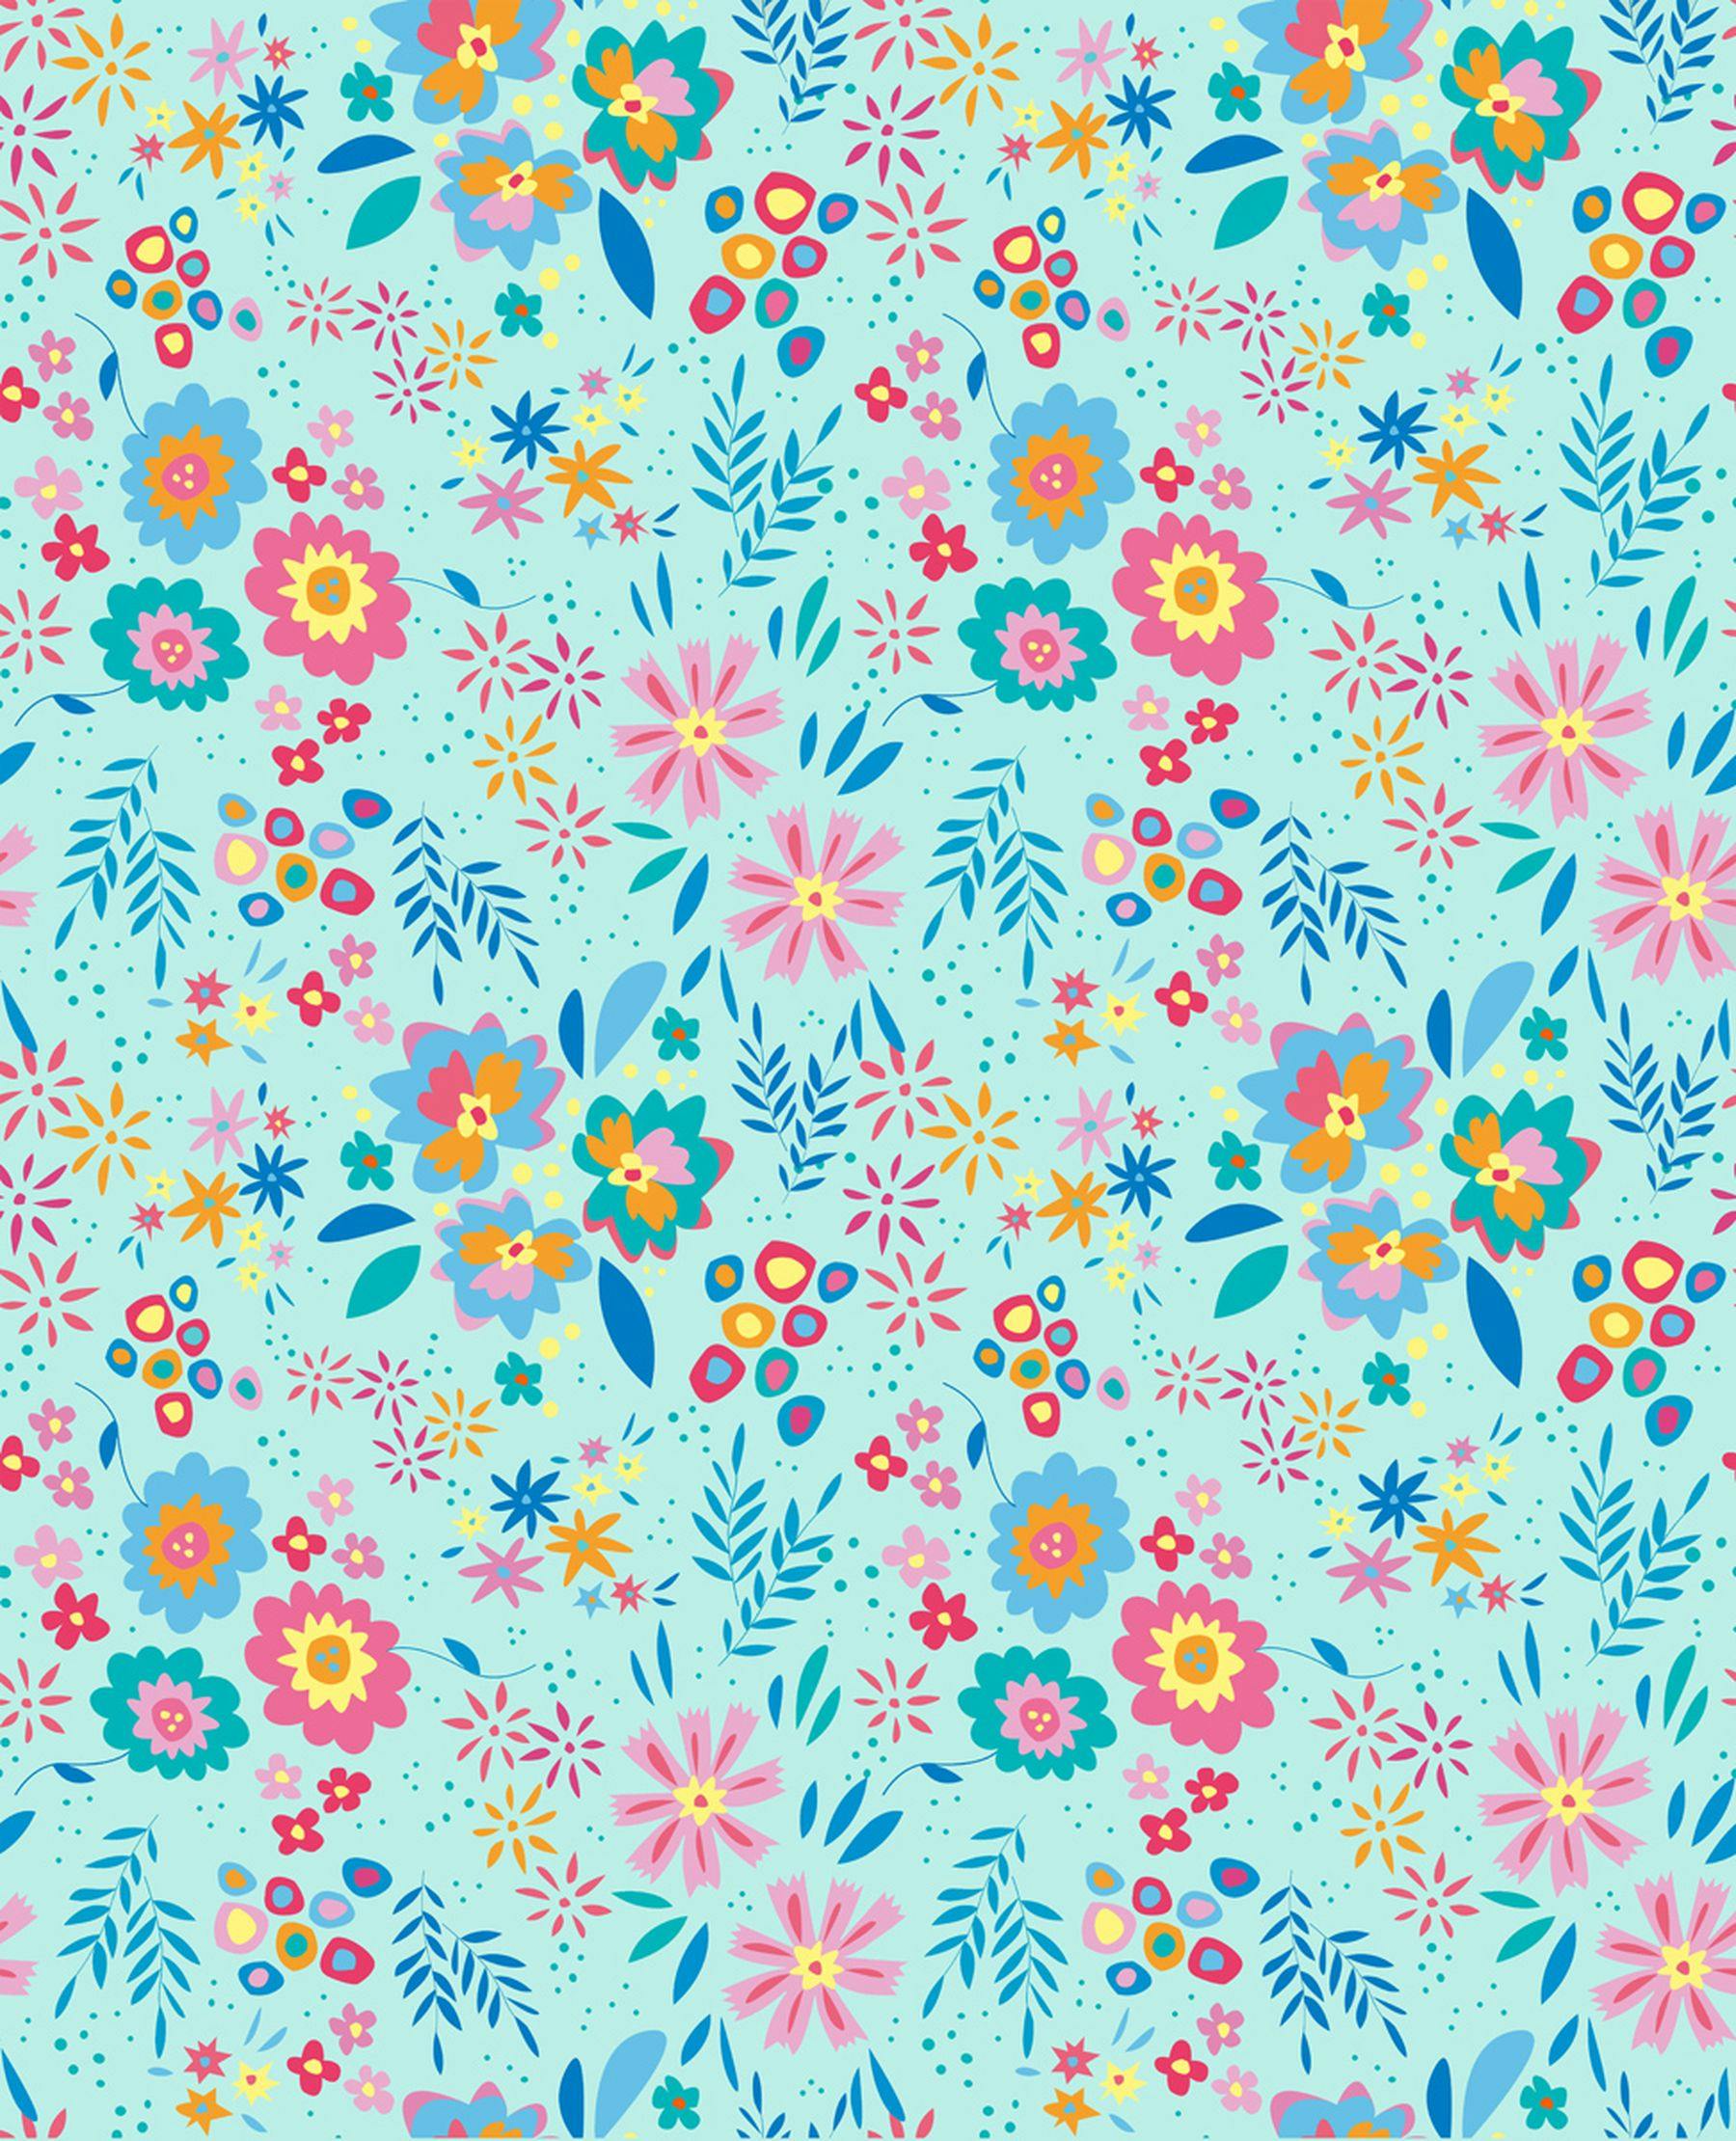 A digital repeat pattern illustration featuring colourful flowers on a light blue background. Colours include blues, yellows, greens and oranges.